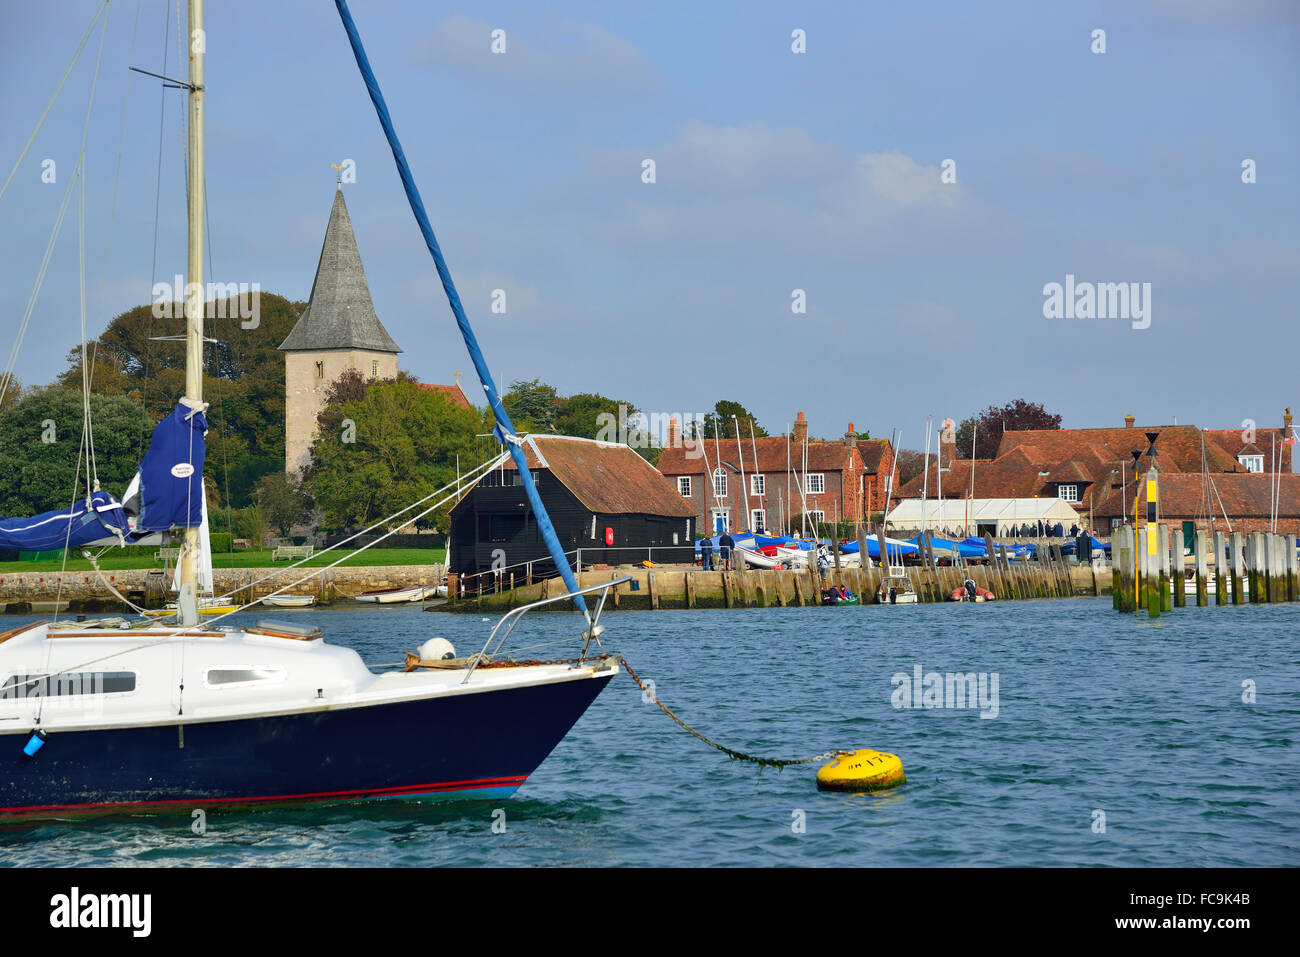 View taken of the village of Bosham situated in Chichester Harbour,West Sussex, England (UK) Stock Photo